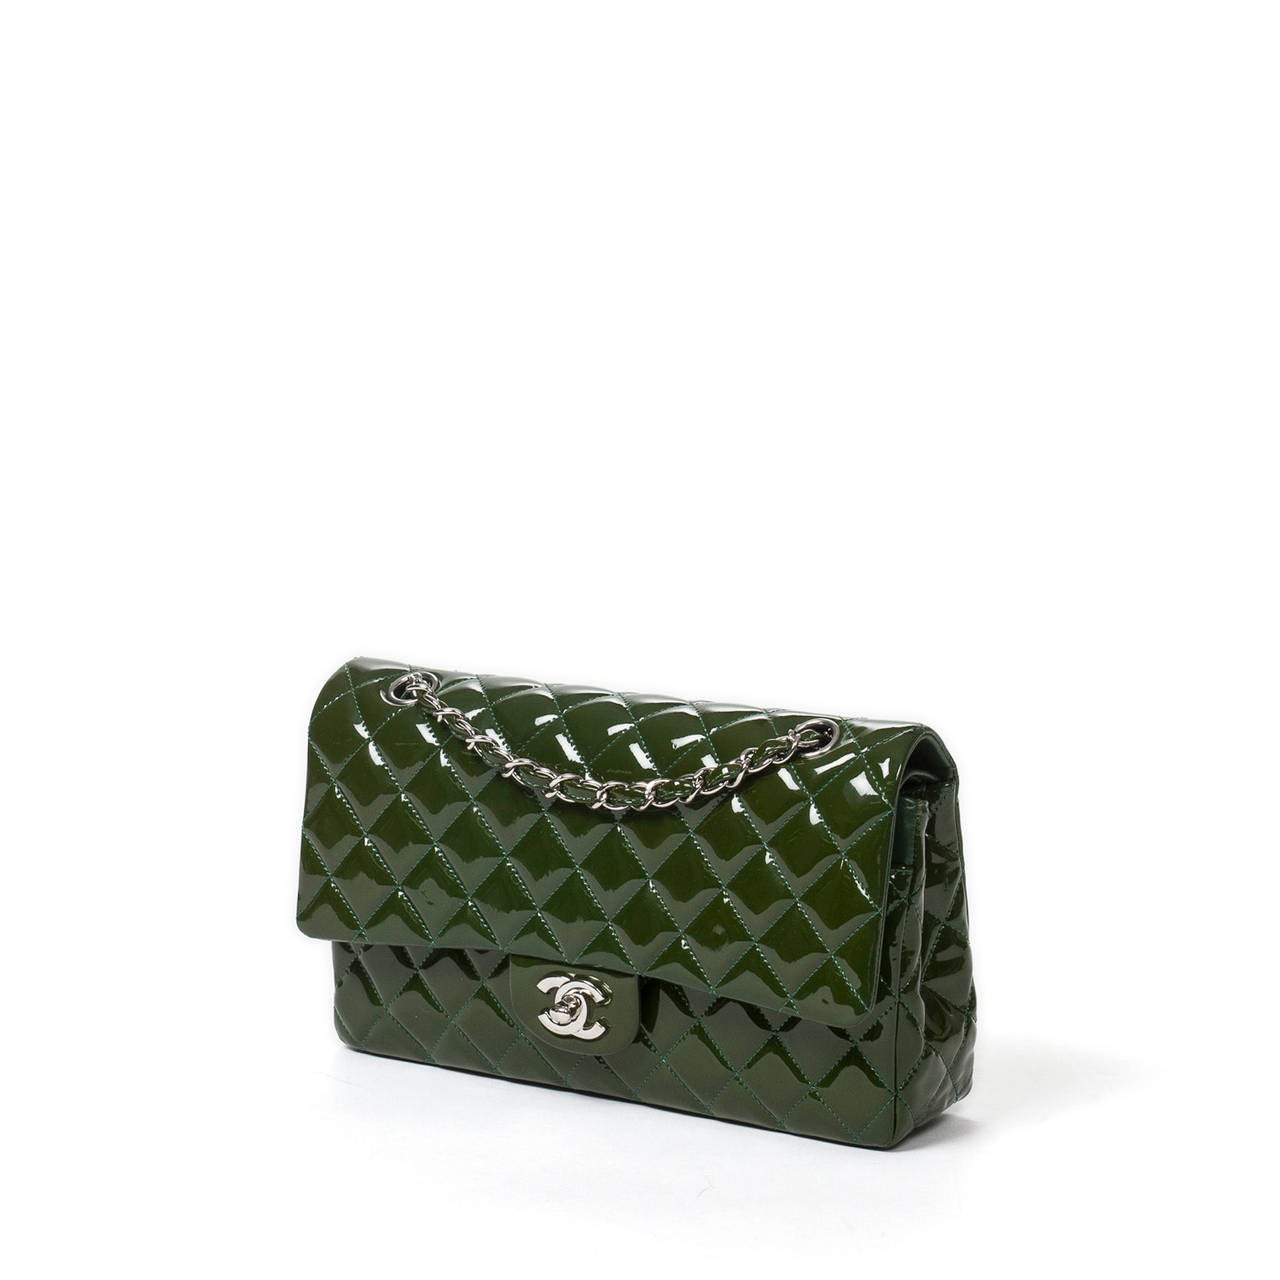 Classic double flap 26cm in juniper green quilted patent leather with double flap, double chain strap, CC turnlock and silver tone hardware. Green leather lined interior with 3 slip pockets. Model of 2011 (Code : 15429107). Box, dustbag and